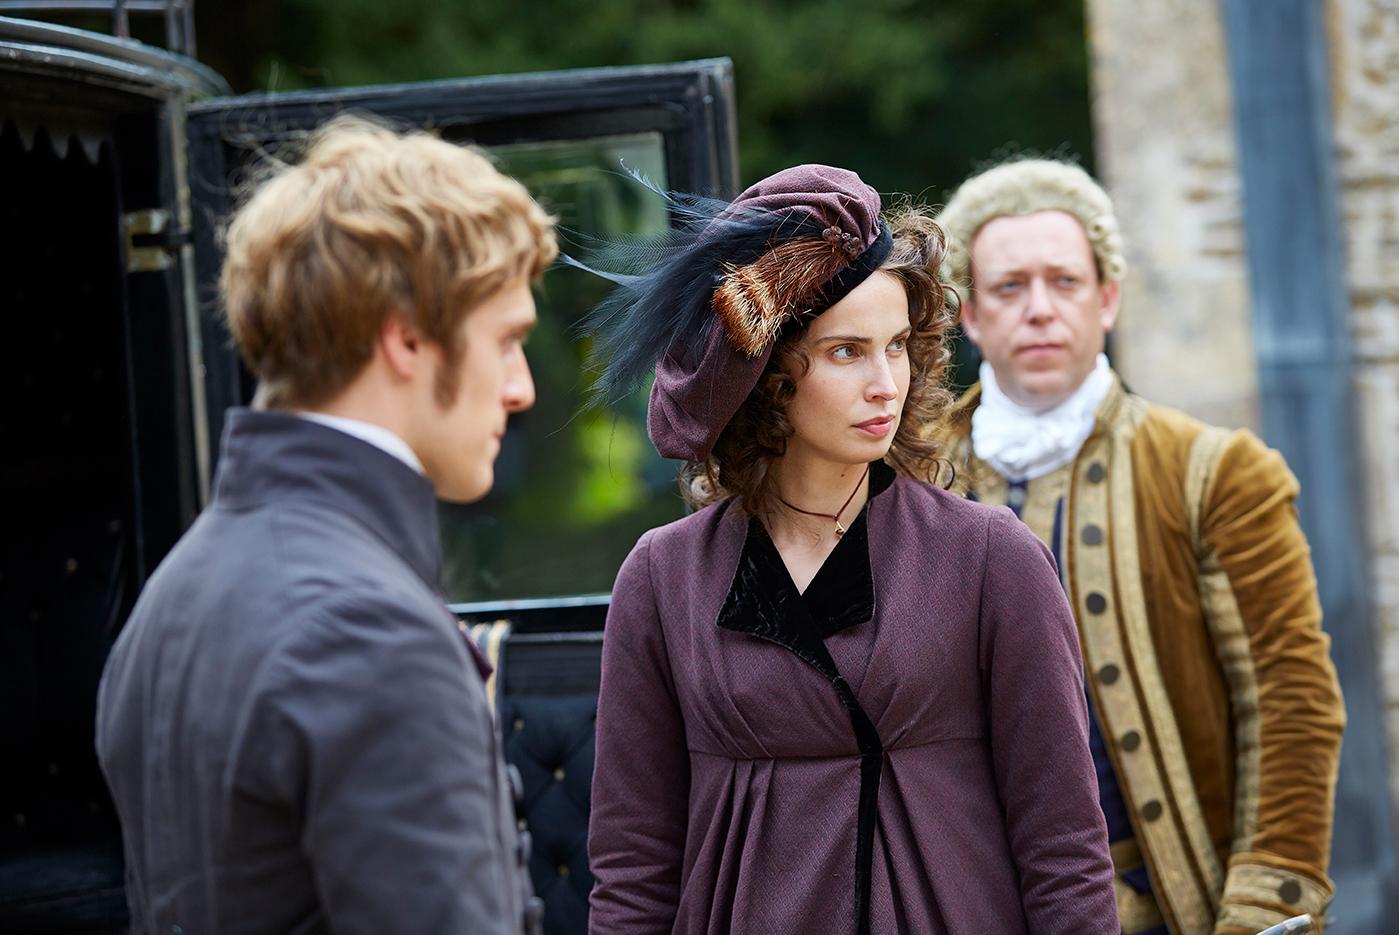 Jack Farthing as George and Heida Reed as Elizabeth in Poldark. Photo: Mammoth Screen for BBC and MASTERPIECE